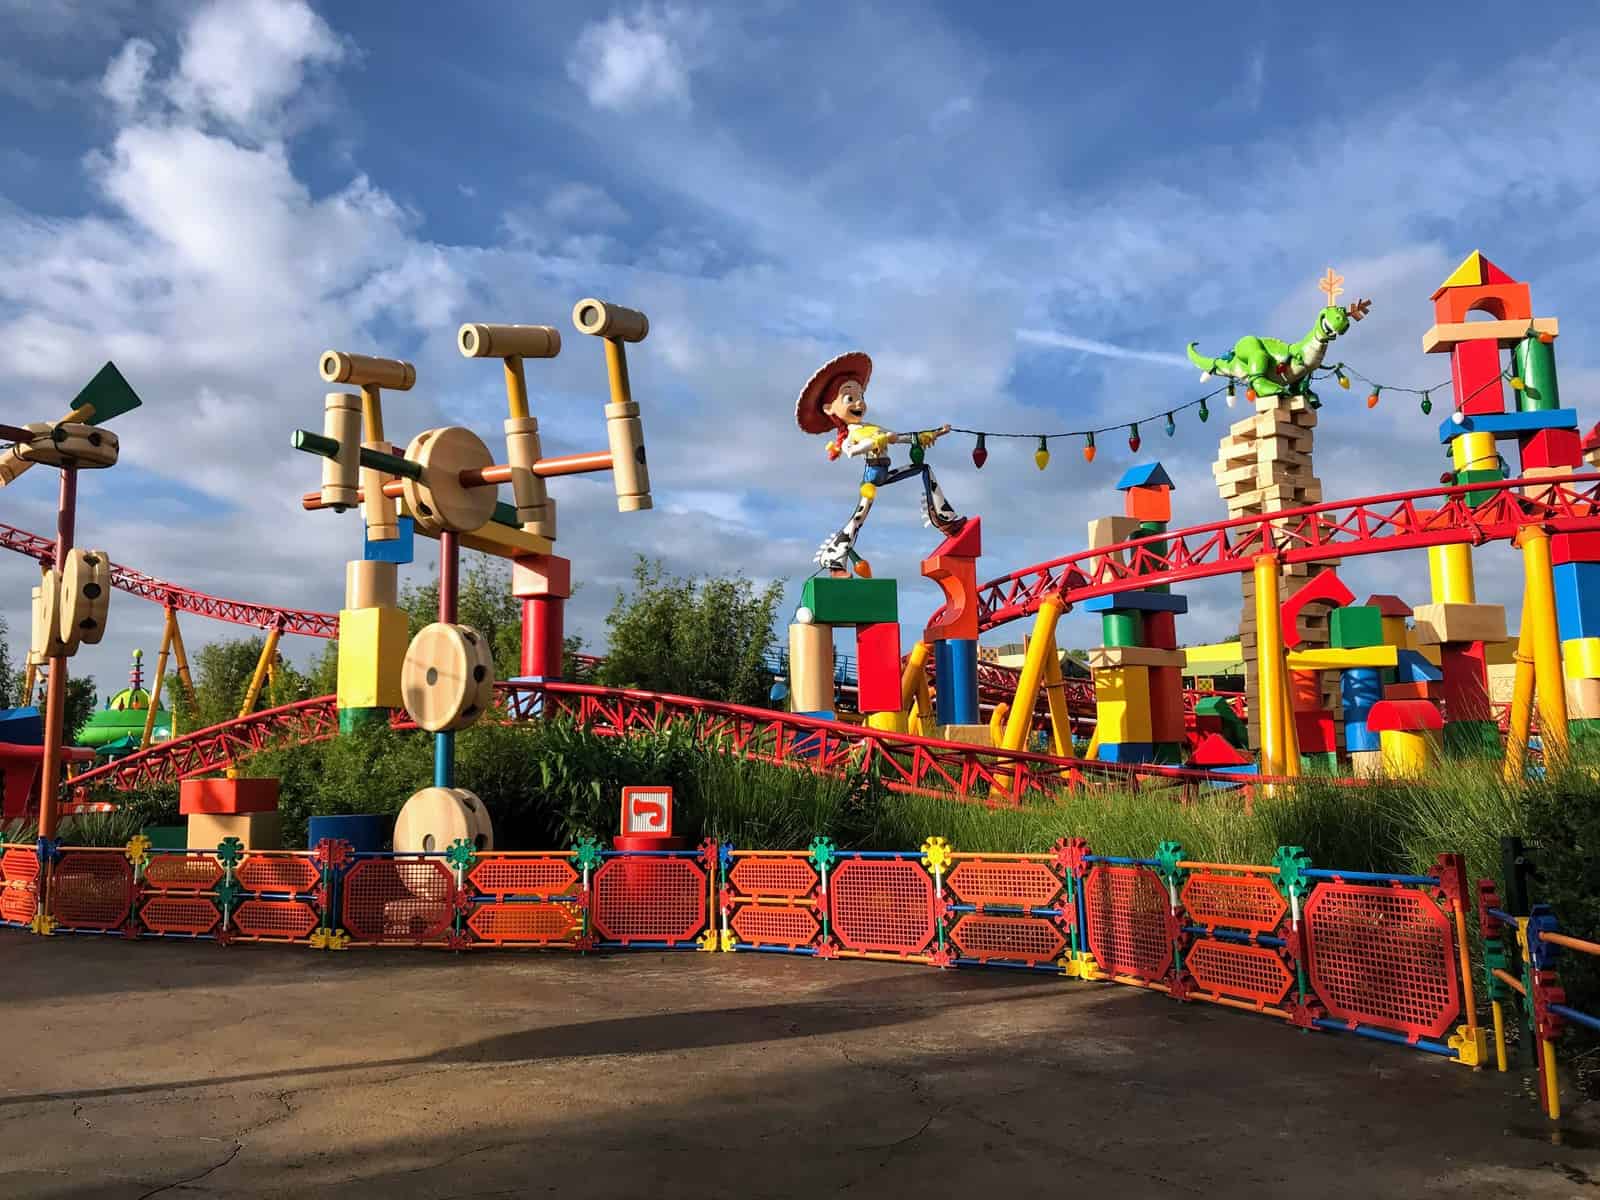 Roundup Rodeo BBQ Restaurant Finally Opening In 2022 At Toy Story Land